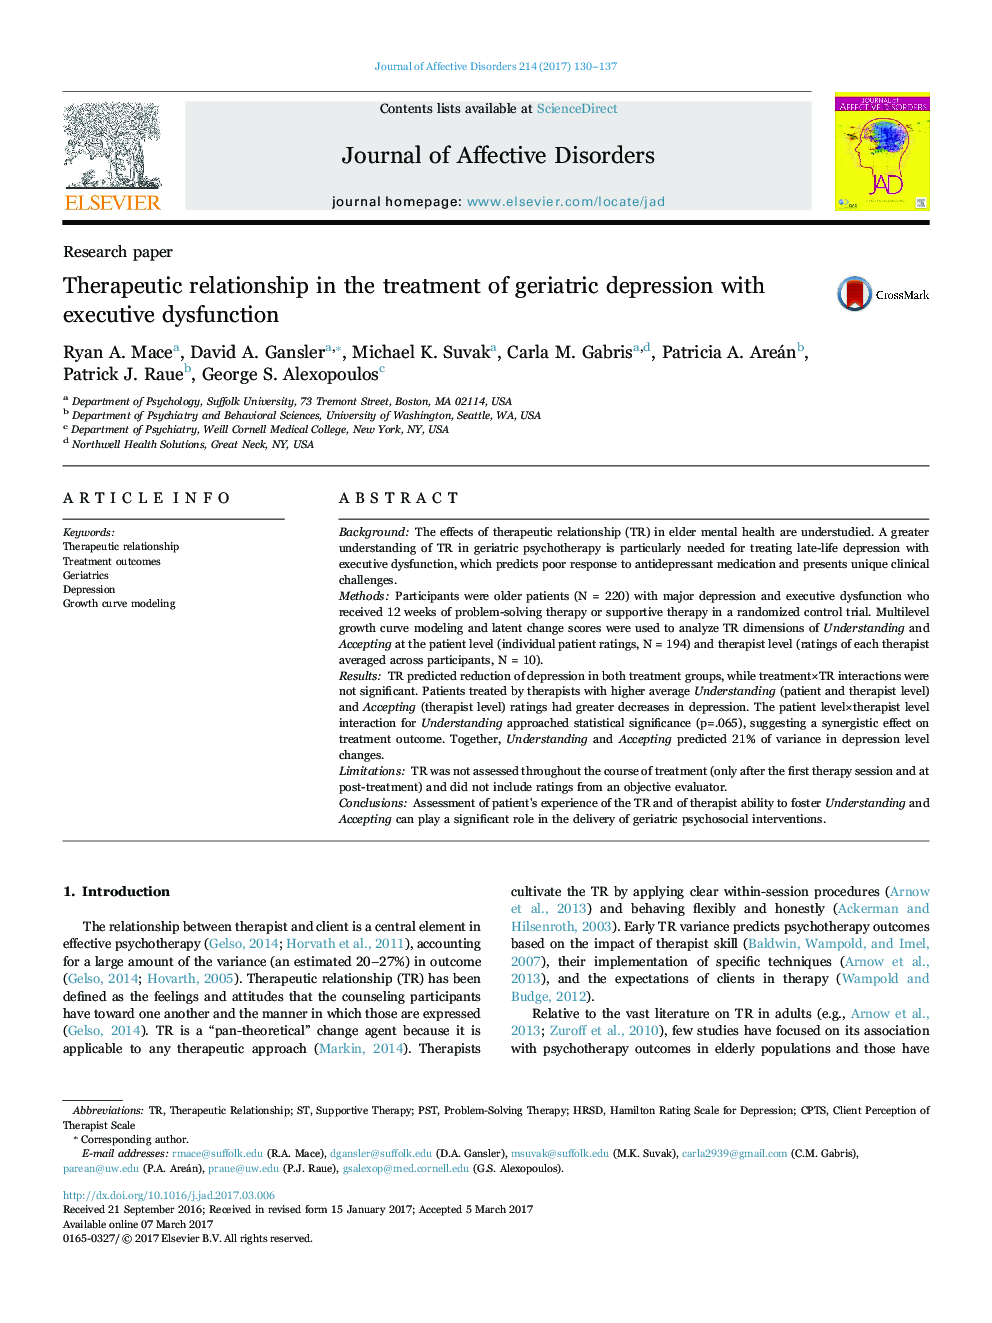 Research paperTherapeutic relationship in the treatment of geriatric depression with executive dysfunction